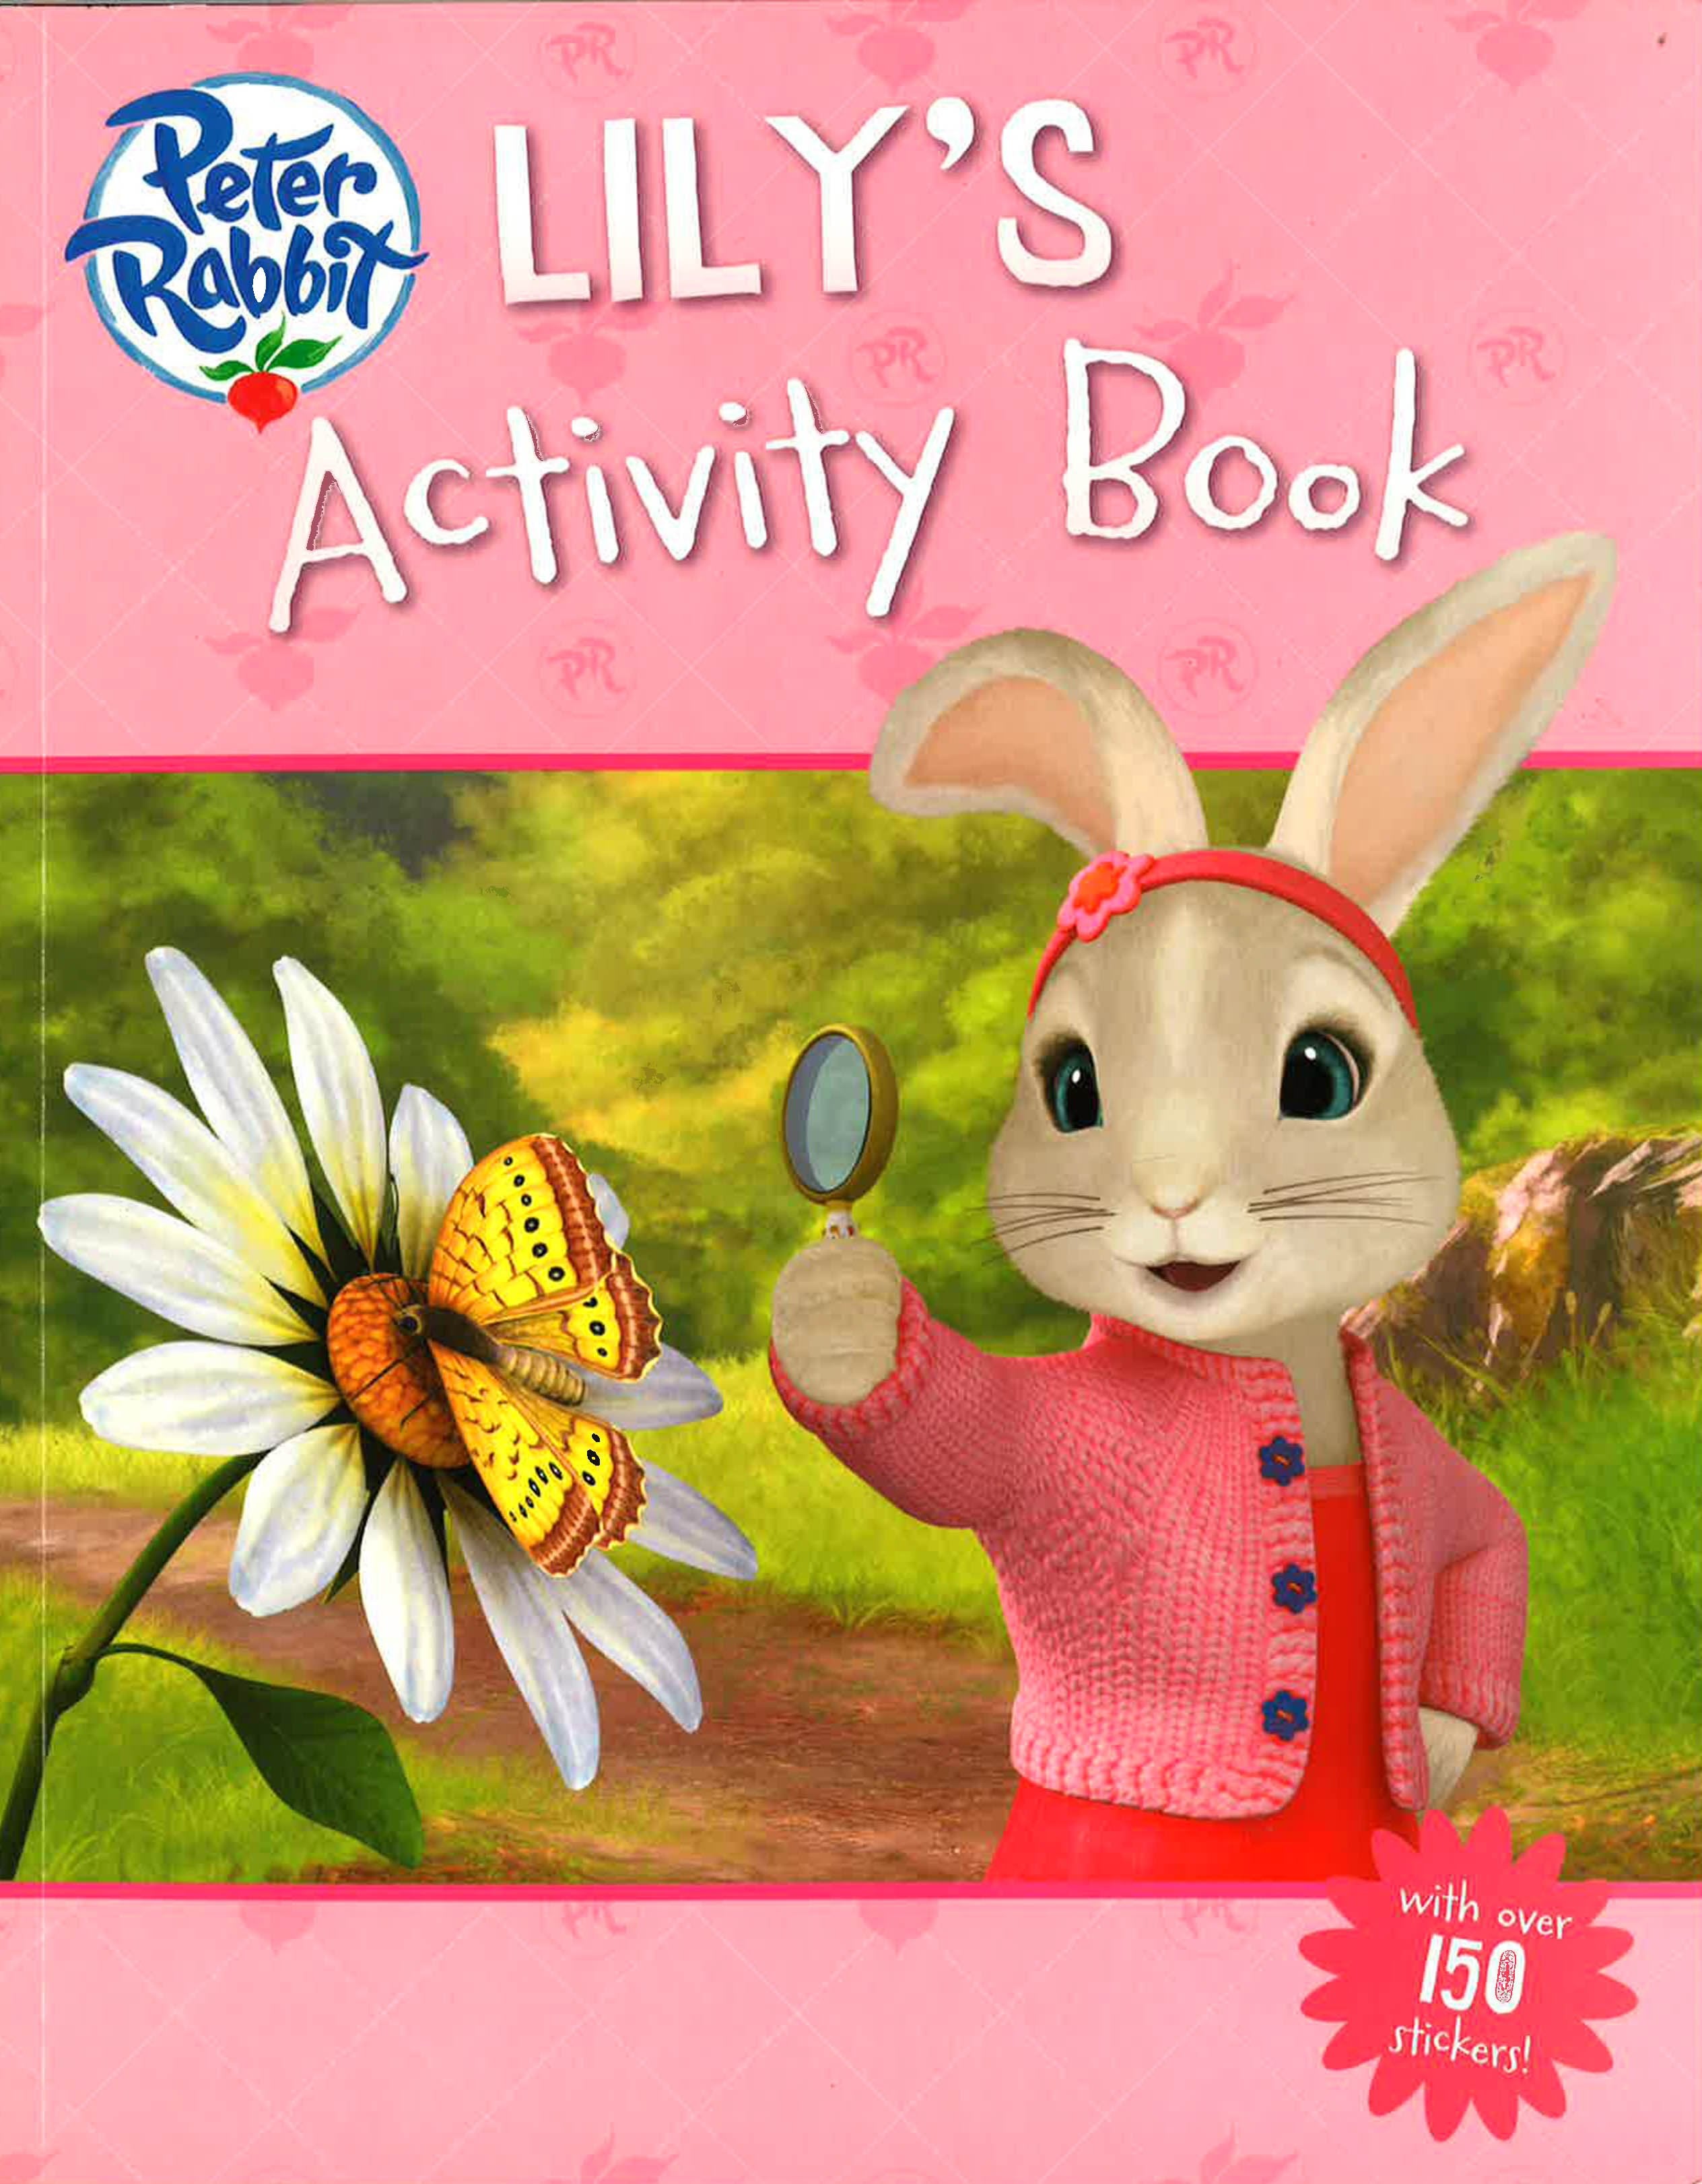 Peter Rabbit Animation: Lily's Activity Book (Peter Rabbit (Frederick –  BookXcess